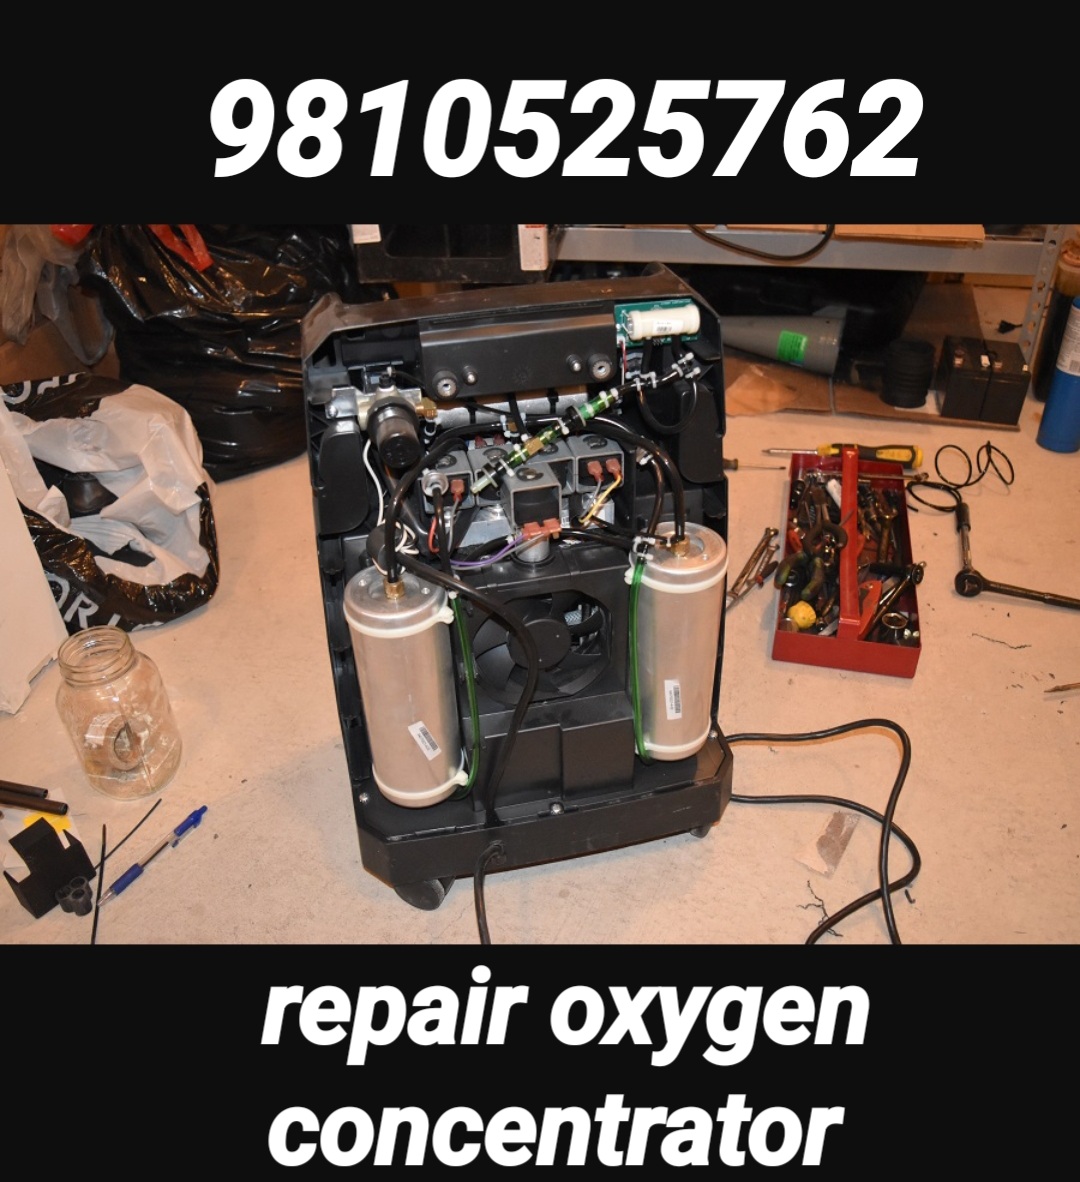 Chinese Oxygen Concentrator Repair New Delhi 8178463439 